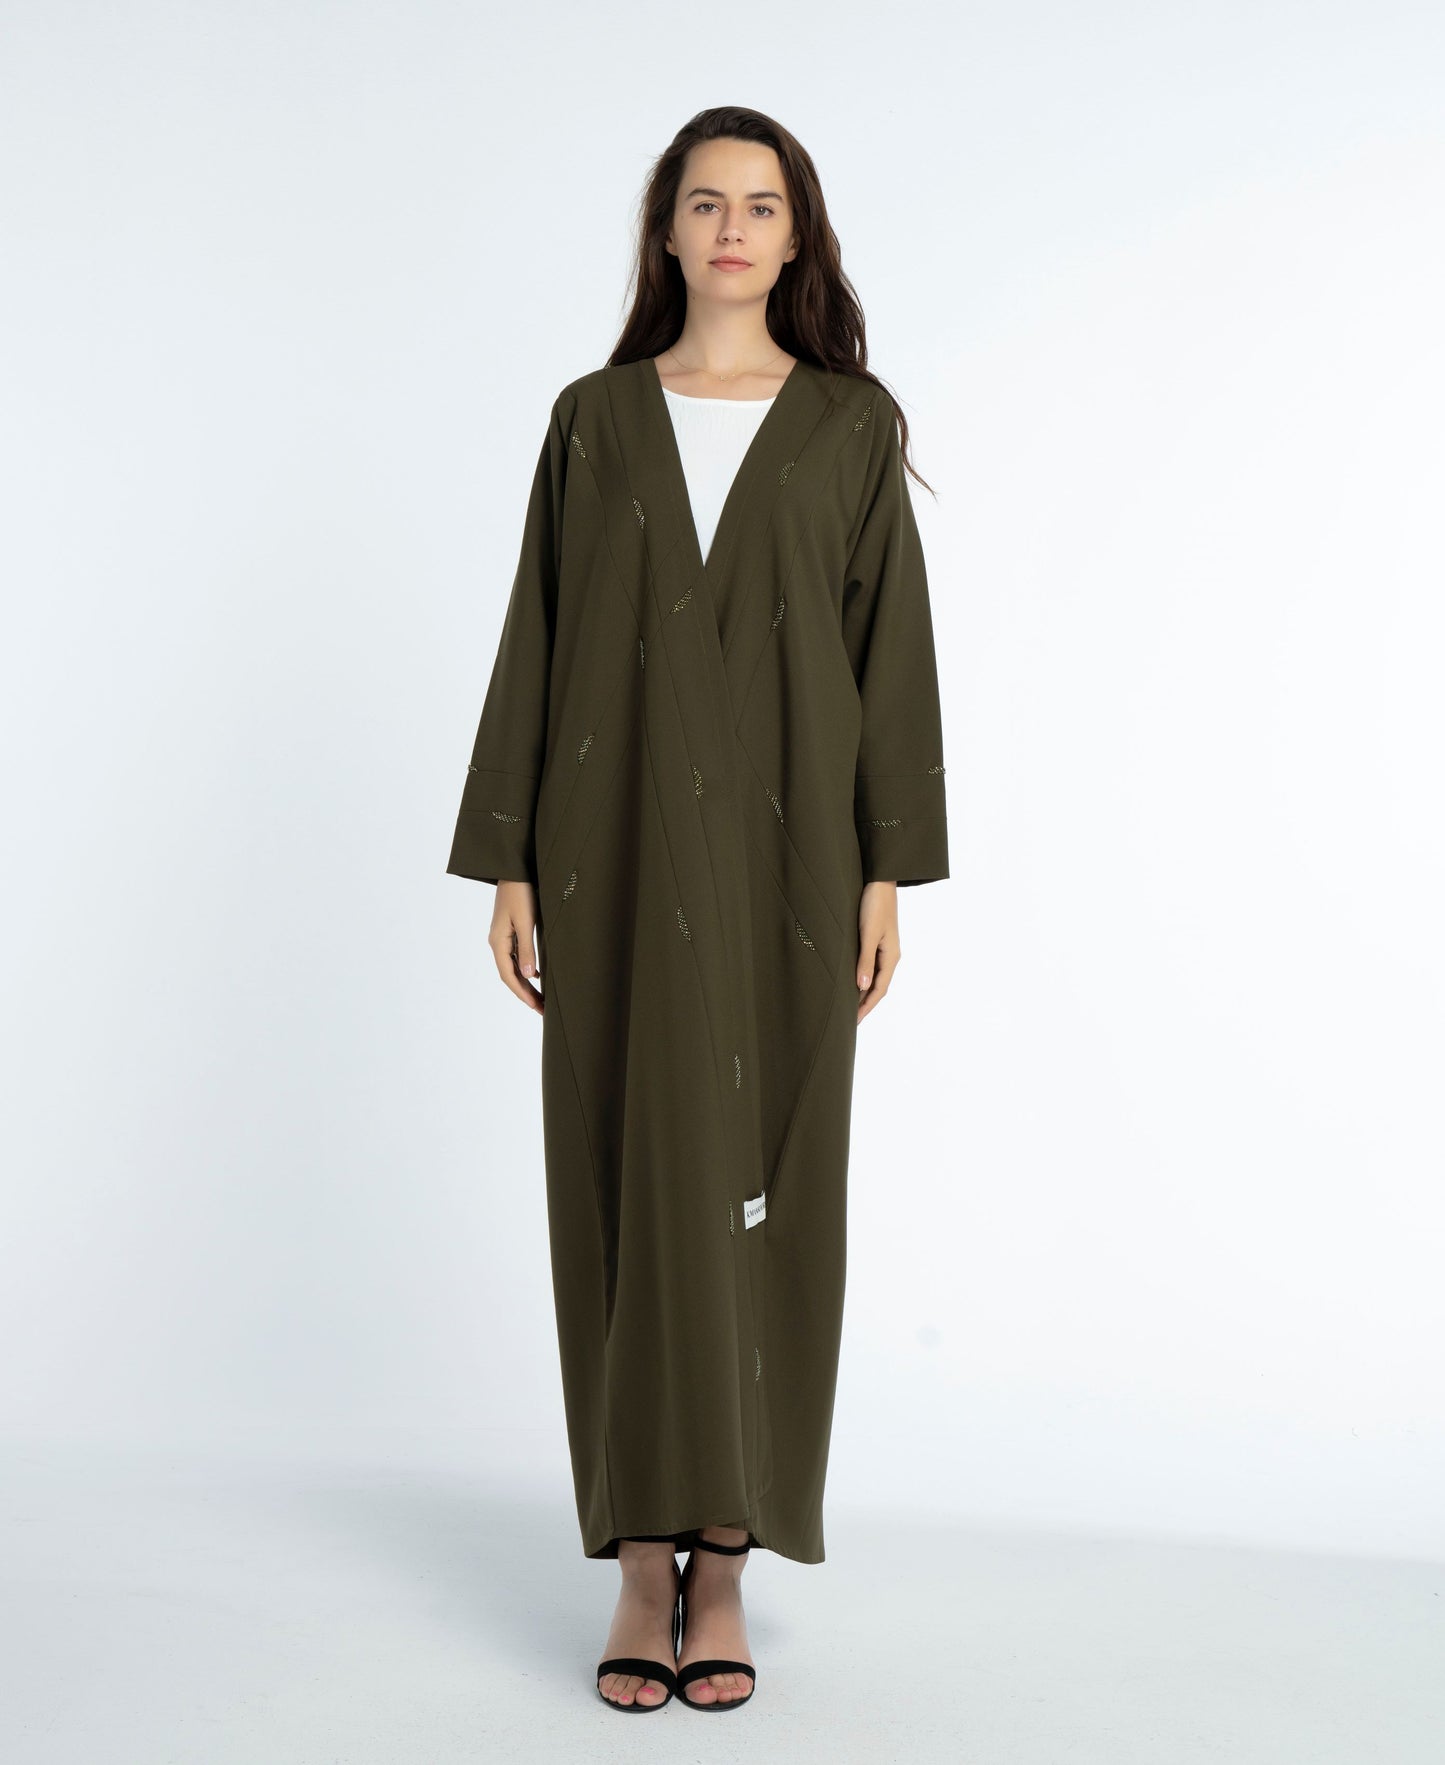 Green colored bisht abaya with elegant line-patterned worm bead embellishments